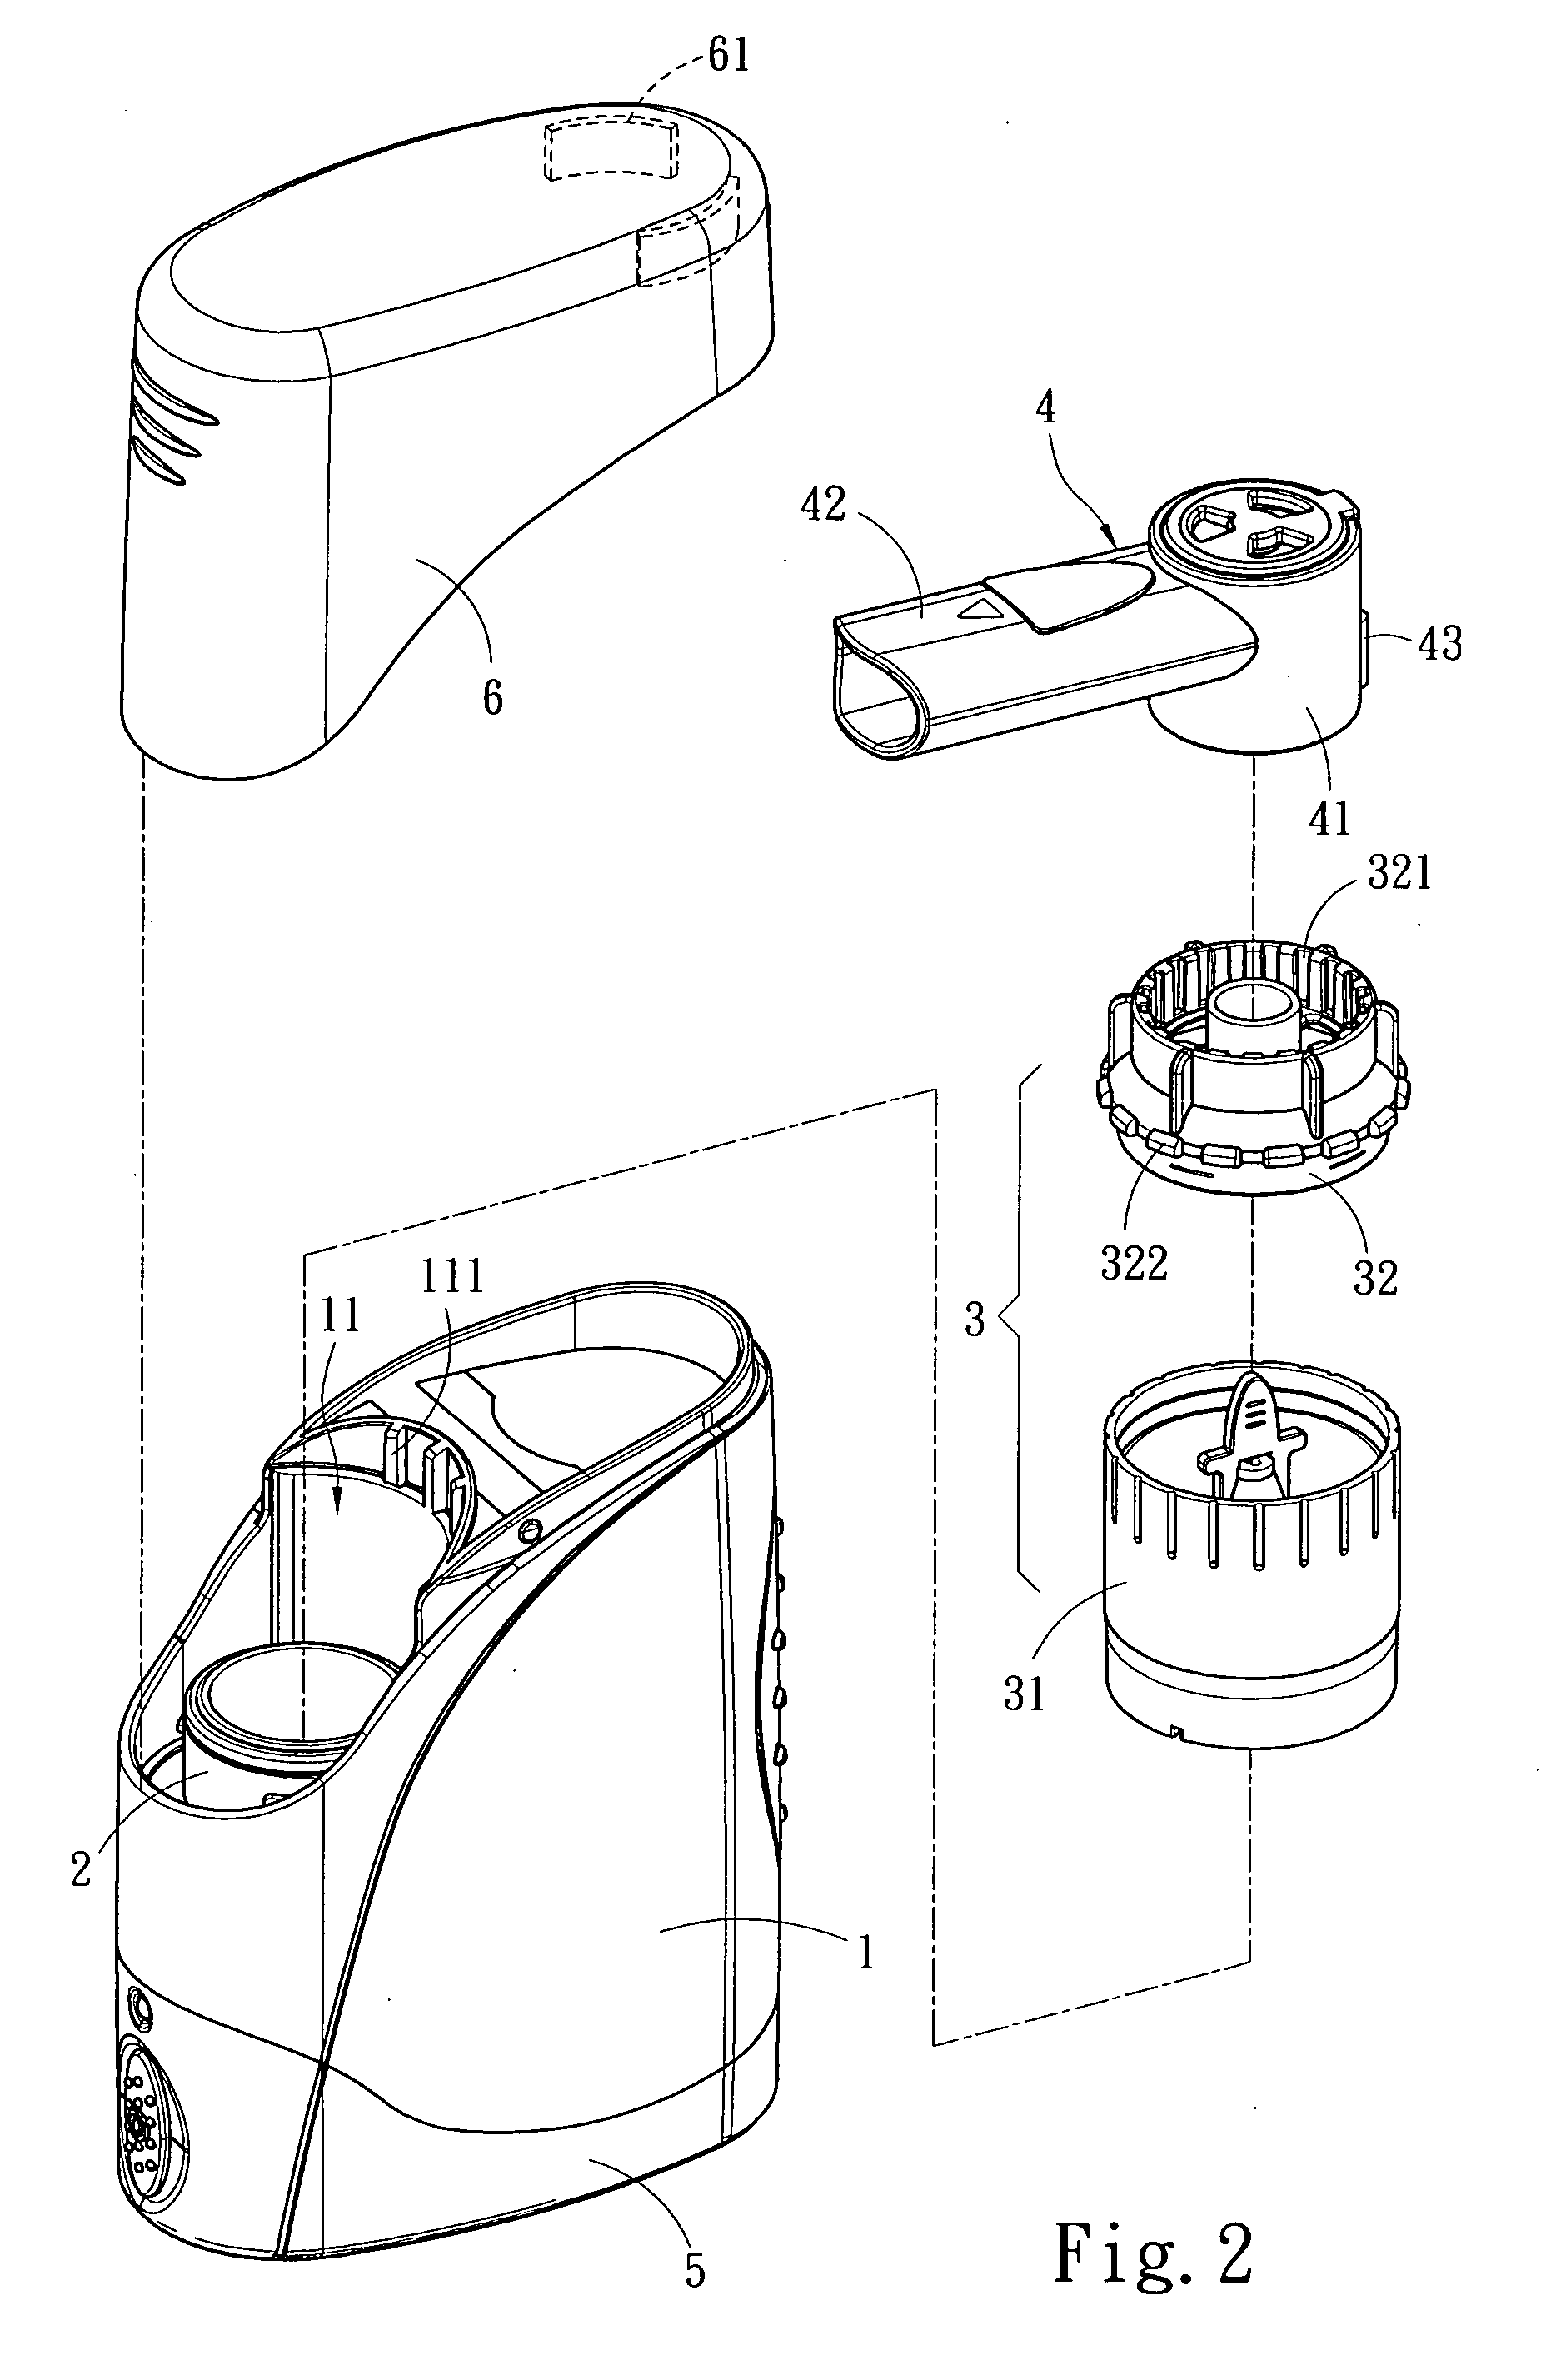 Nebulizing apparatus for medical use with improved nozzle positioning structure